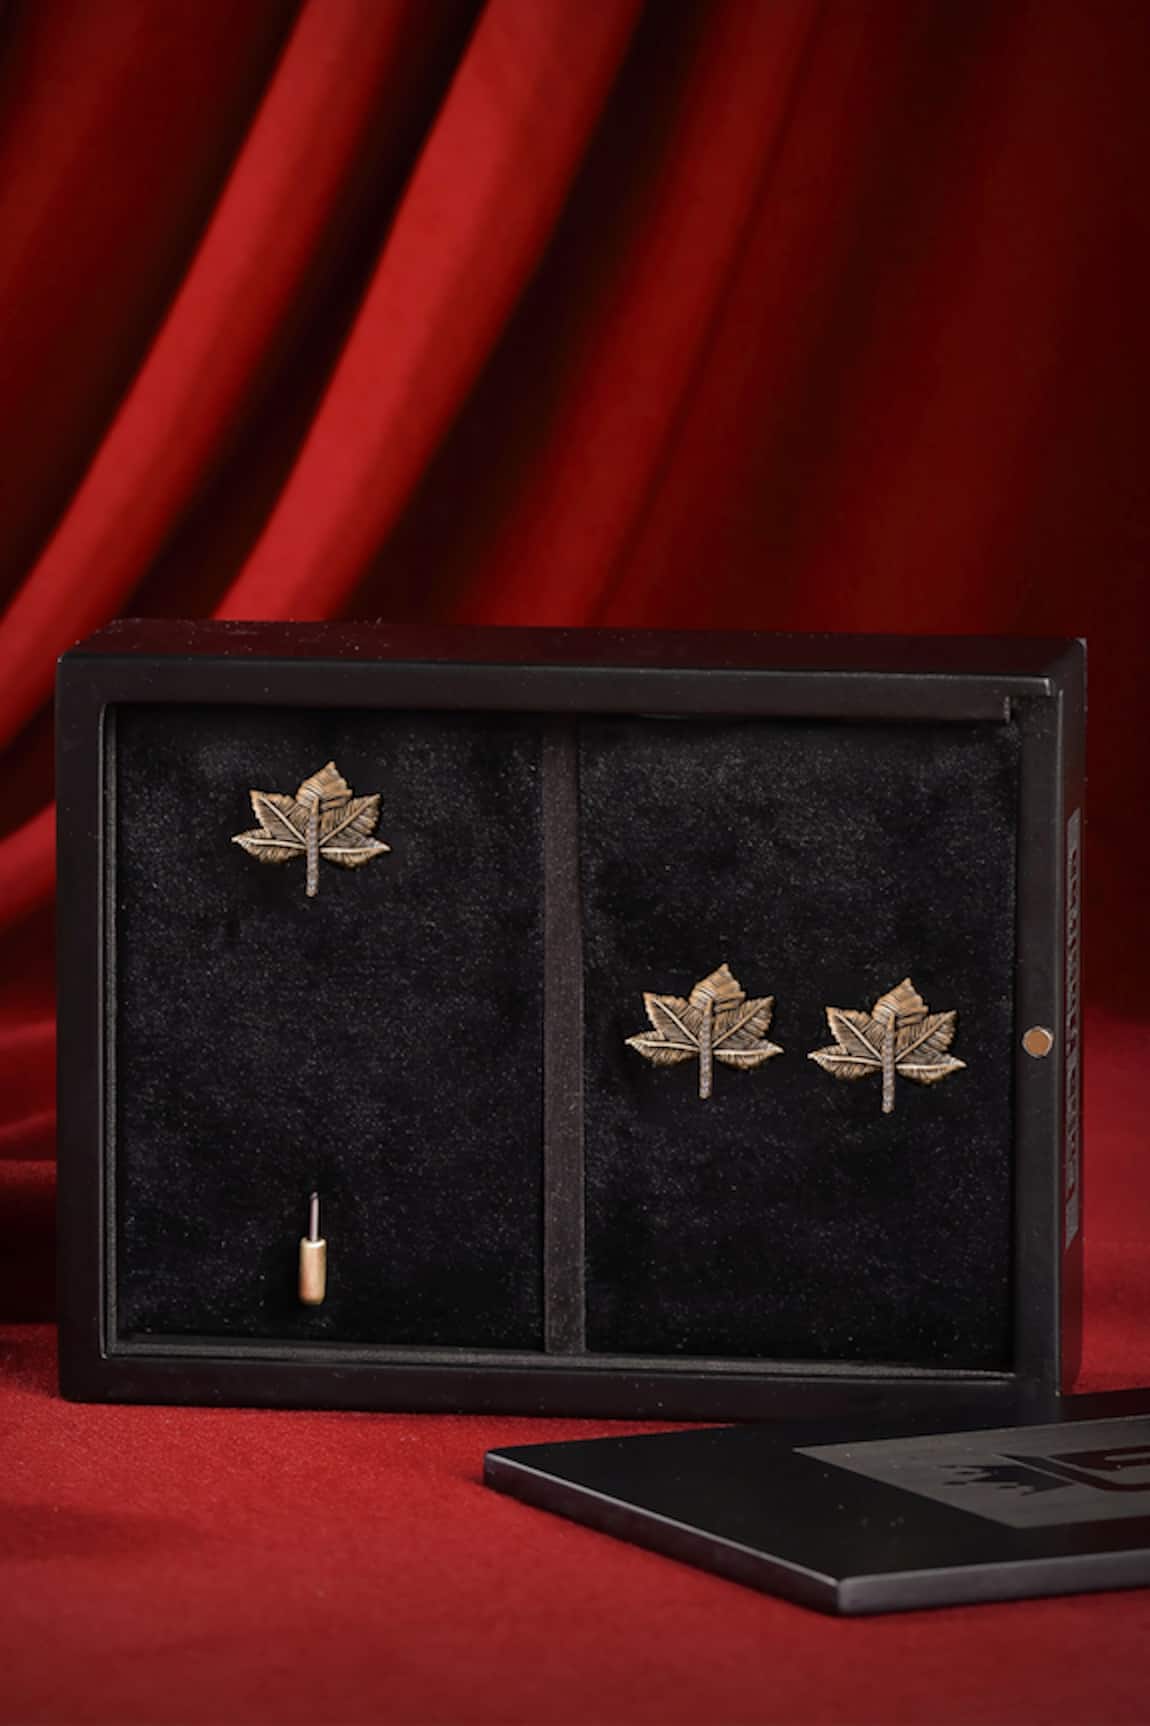 Cosa Nostraa Maple Leaf Carved Cufflinks & Lapel Pin Gift Set